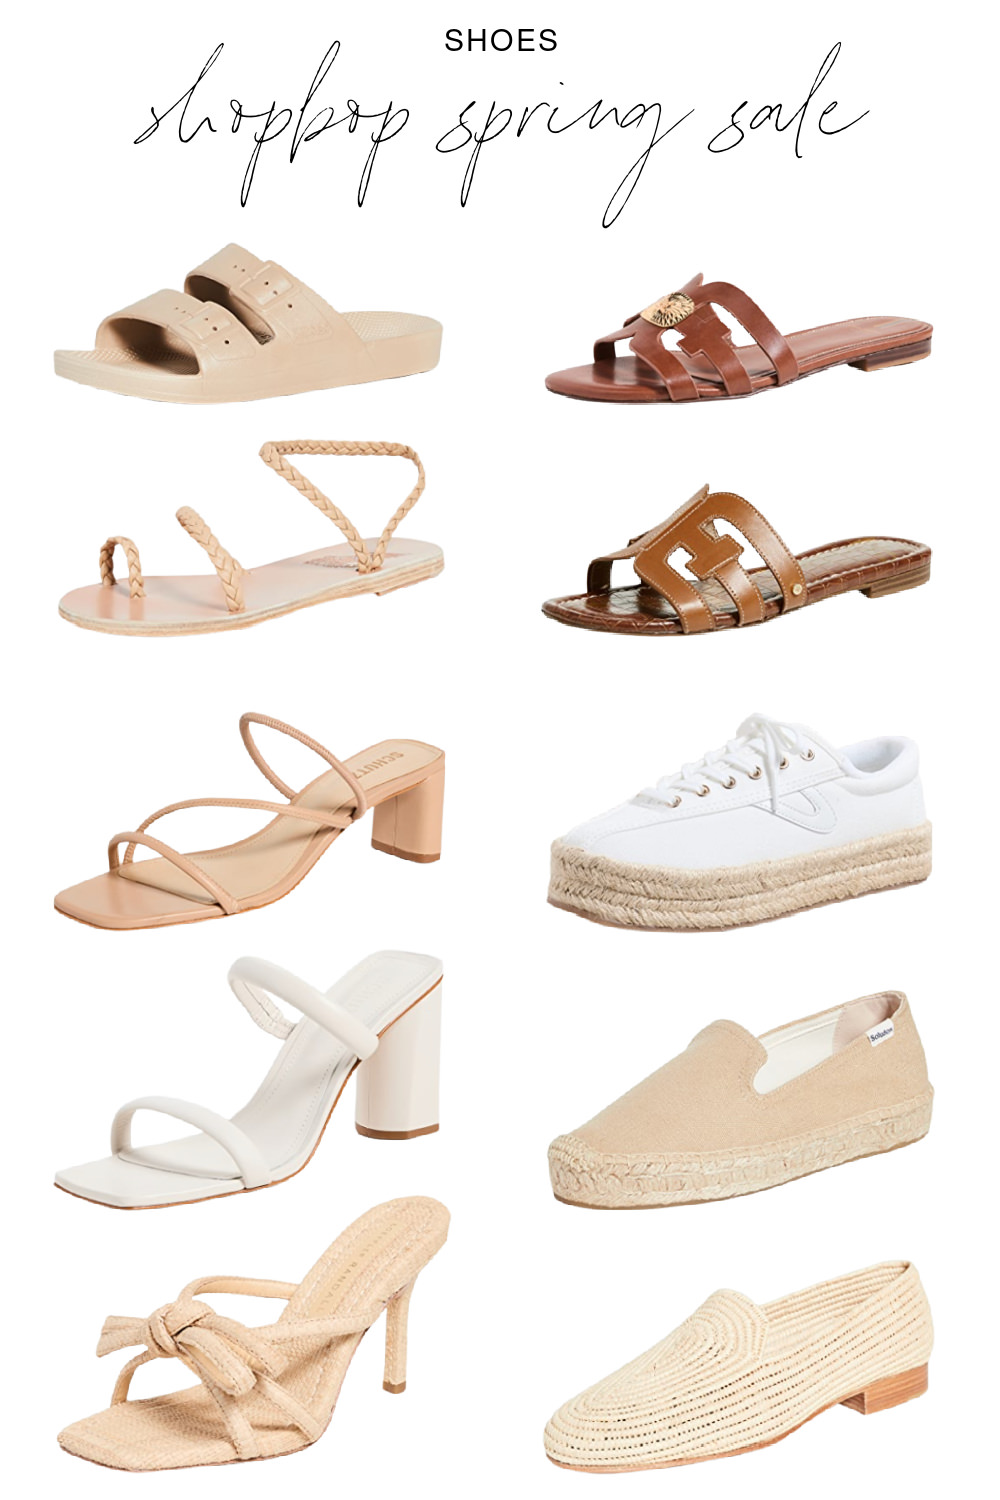 sandals and sneakers at the shopbop sale spring 2023